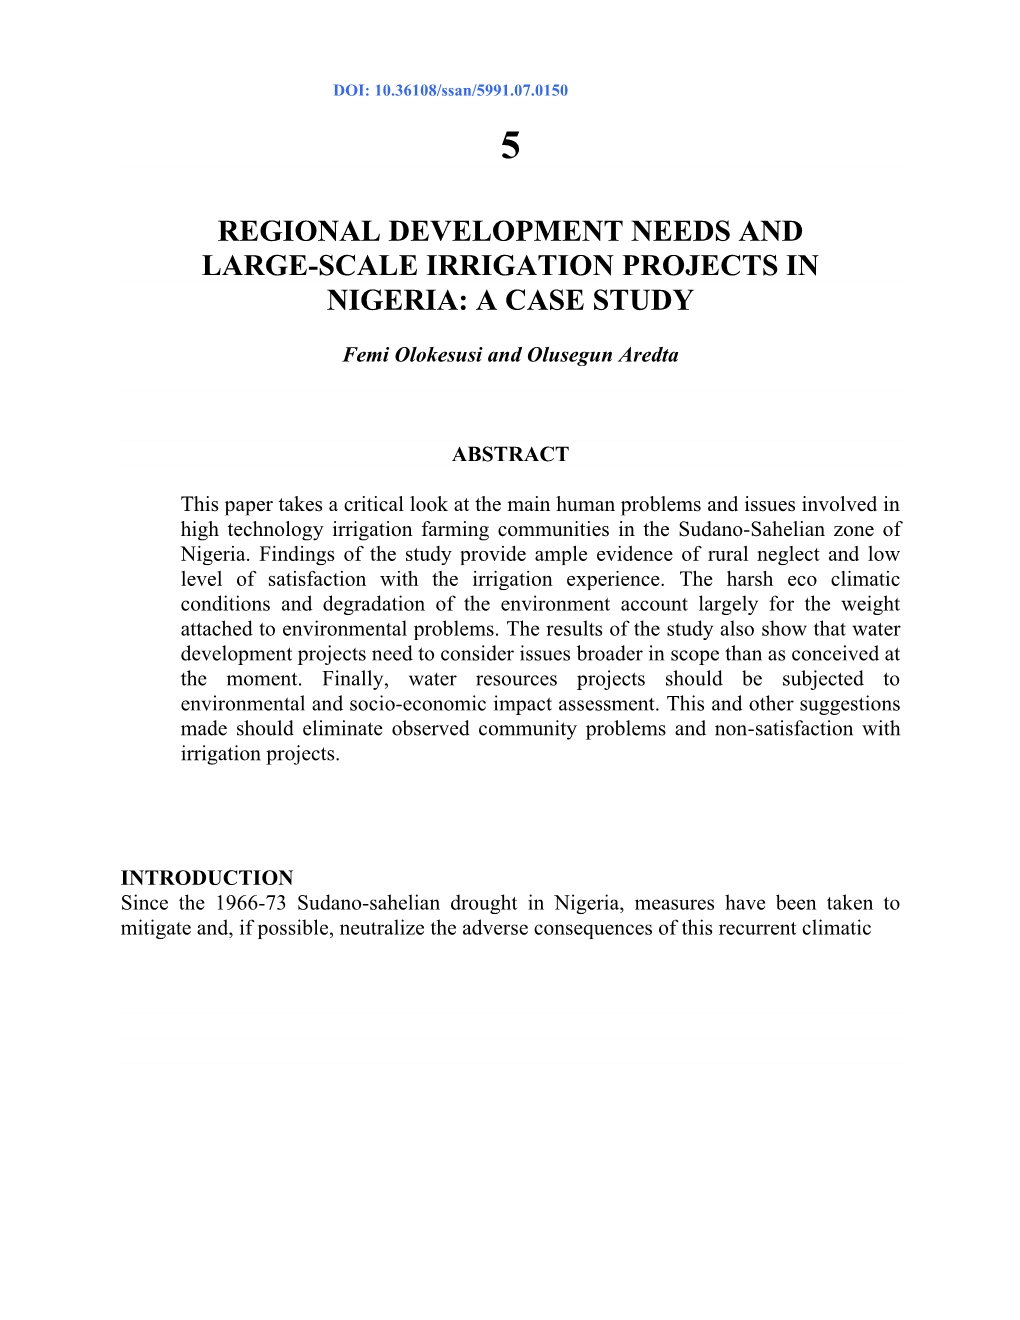 Regional Development Needs and Large-Scale Irrigation Projects in Nigeria: a Case Study